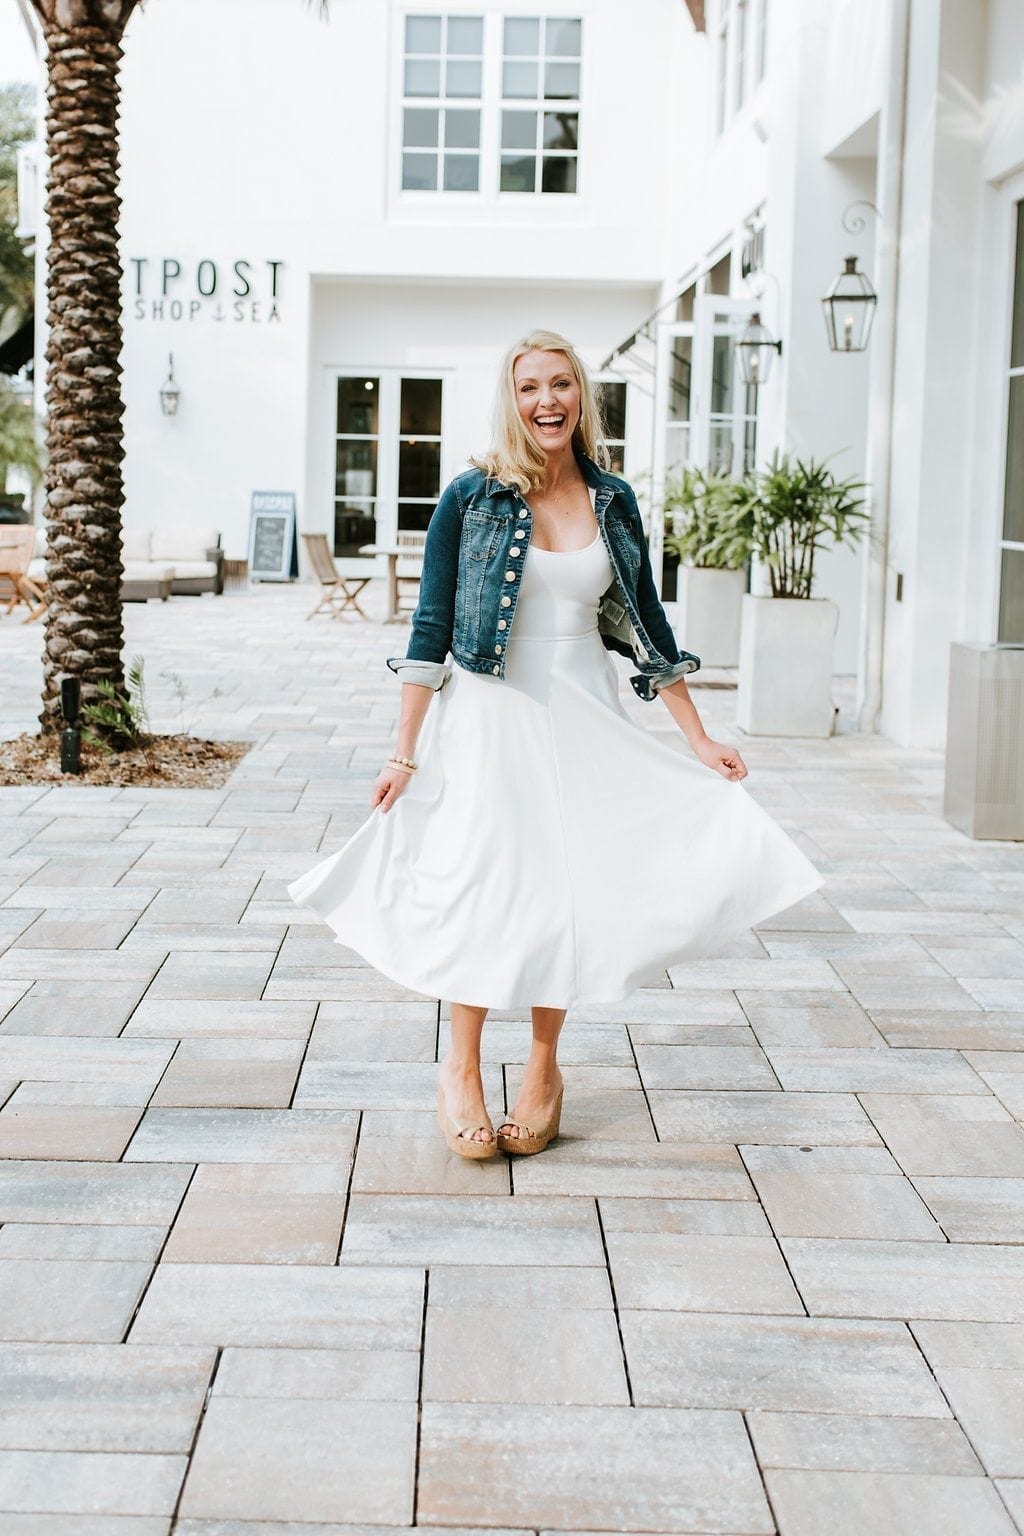 Inexpensive jean jacket to wear with dresses. White full skirt dress.